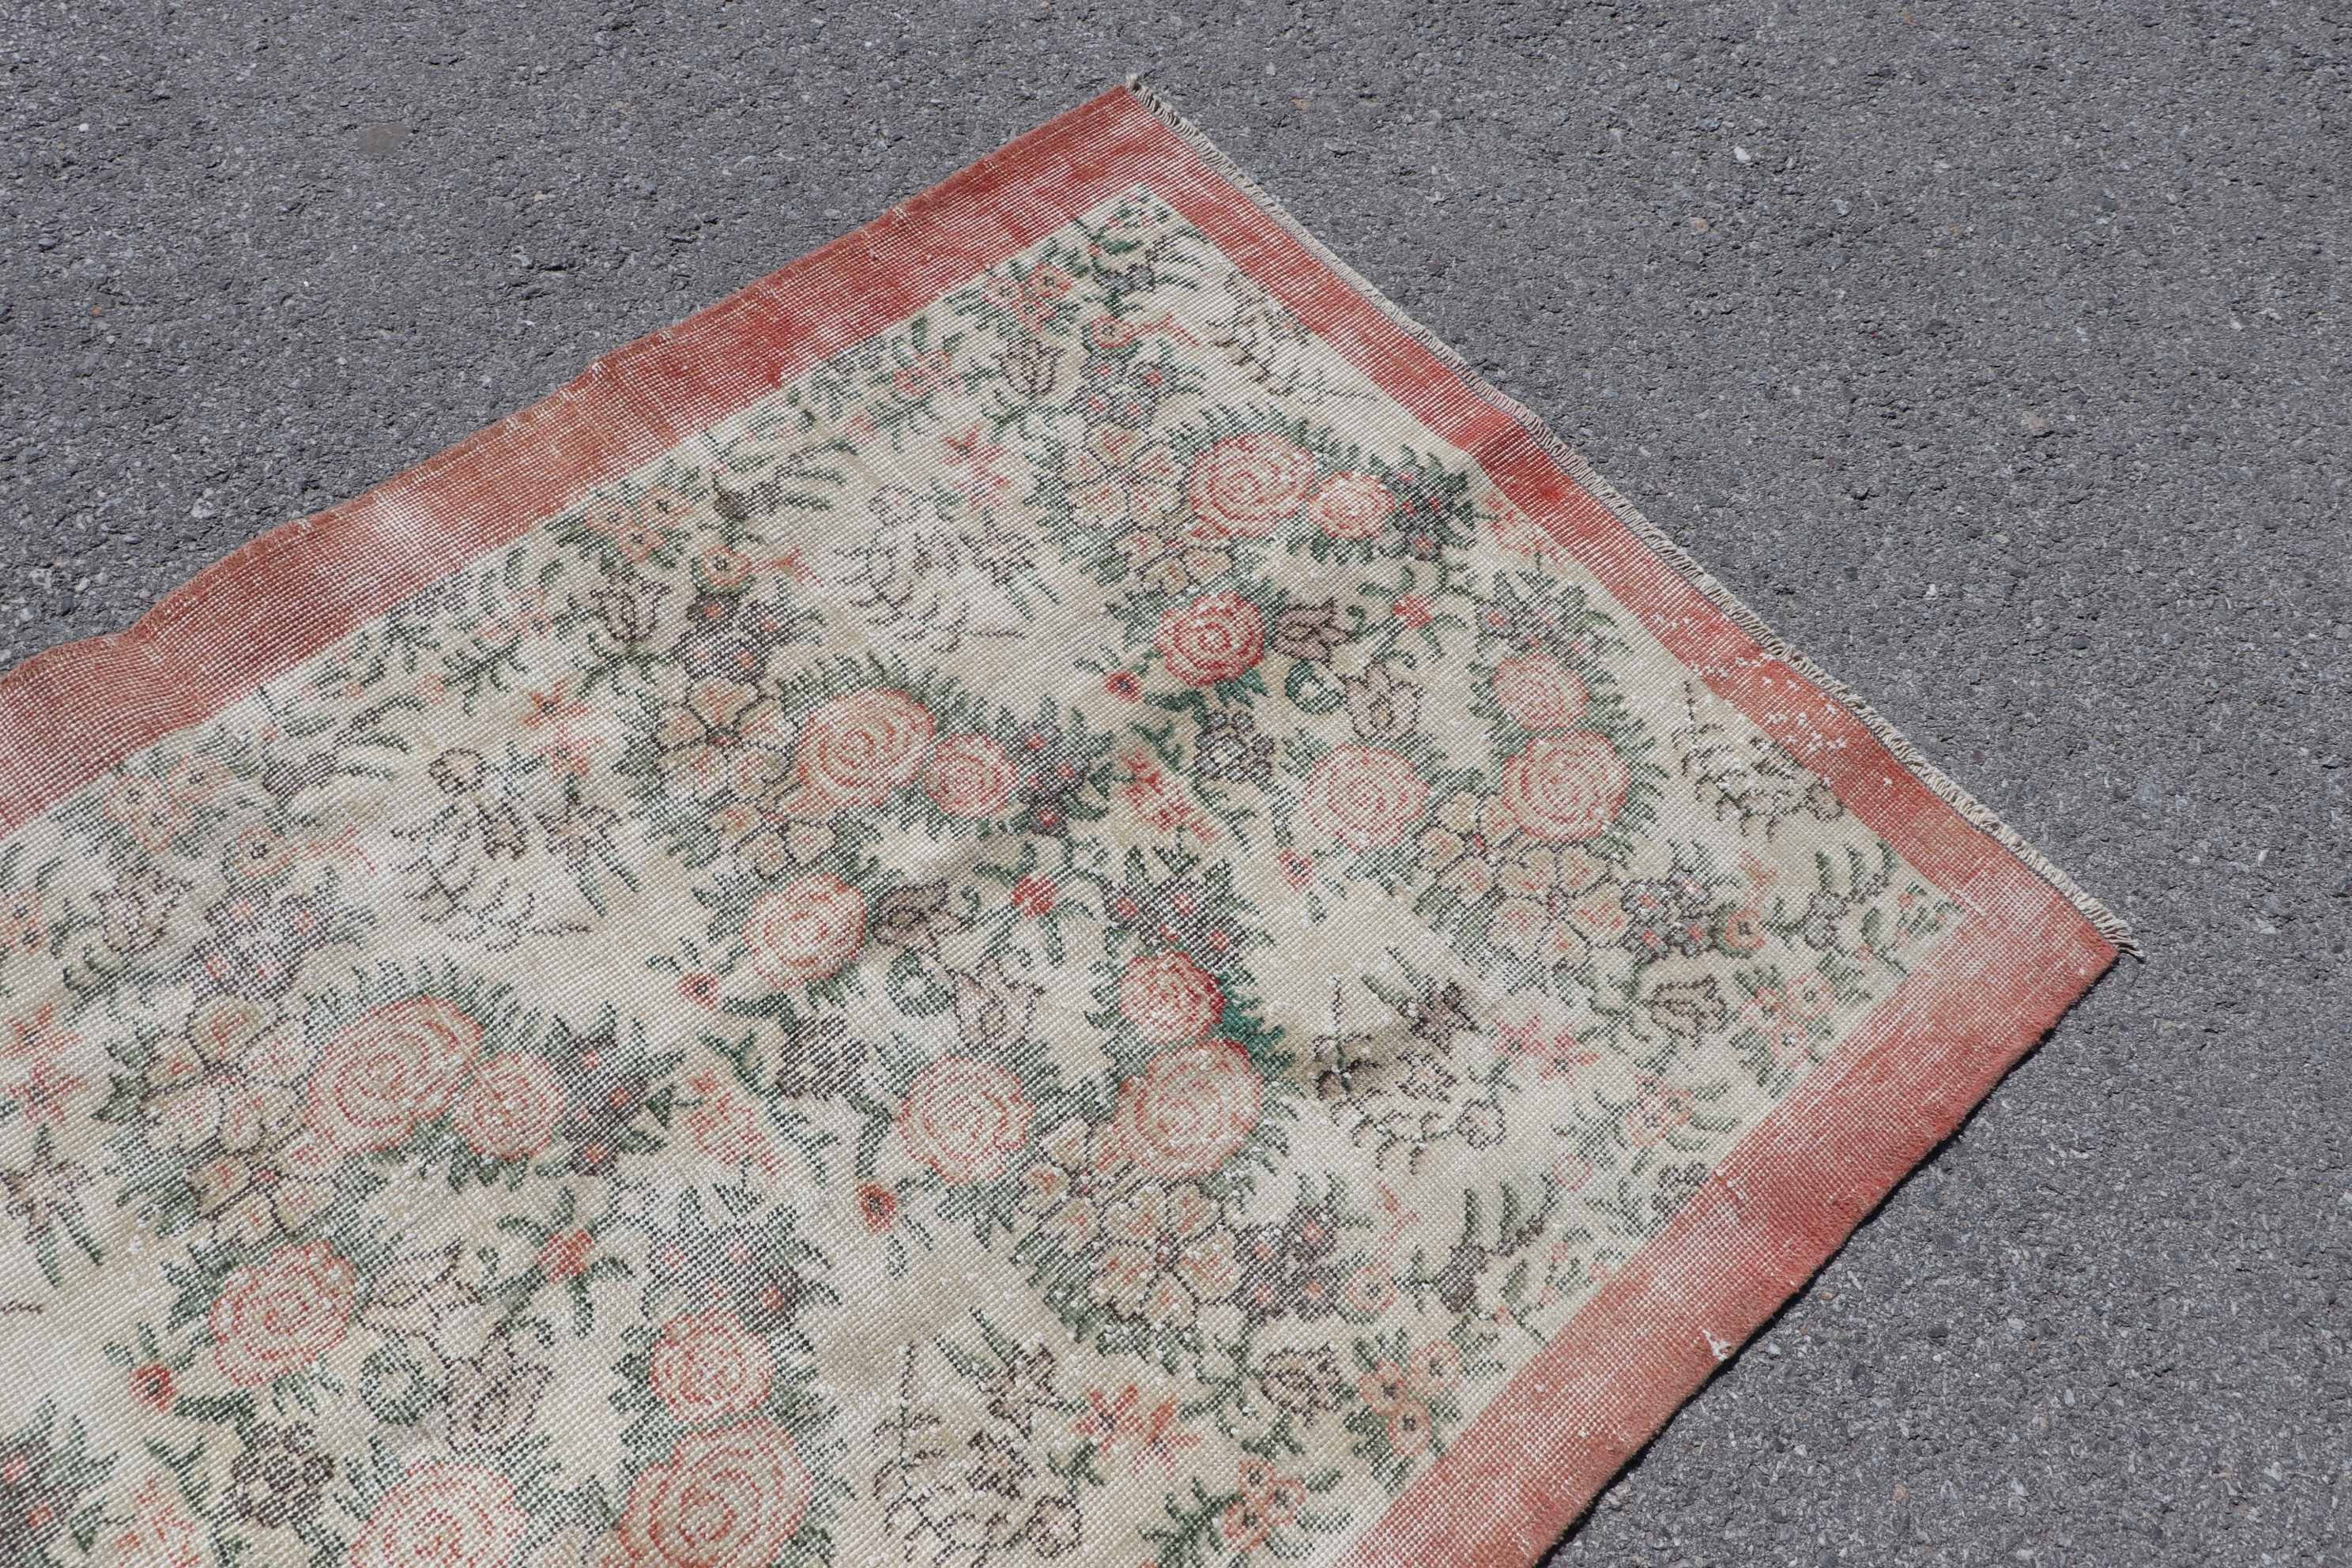 Entry Rug, Red Kitchen Rug, Nursery Rug, Home Decor Rug, Turkish Rugs, 3.7x6.4 ft Accent Rug, Floor Rugs, Rugs for Entry, Vintage Rug